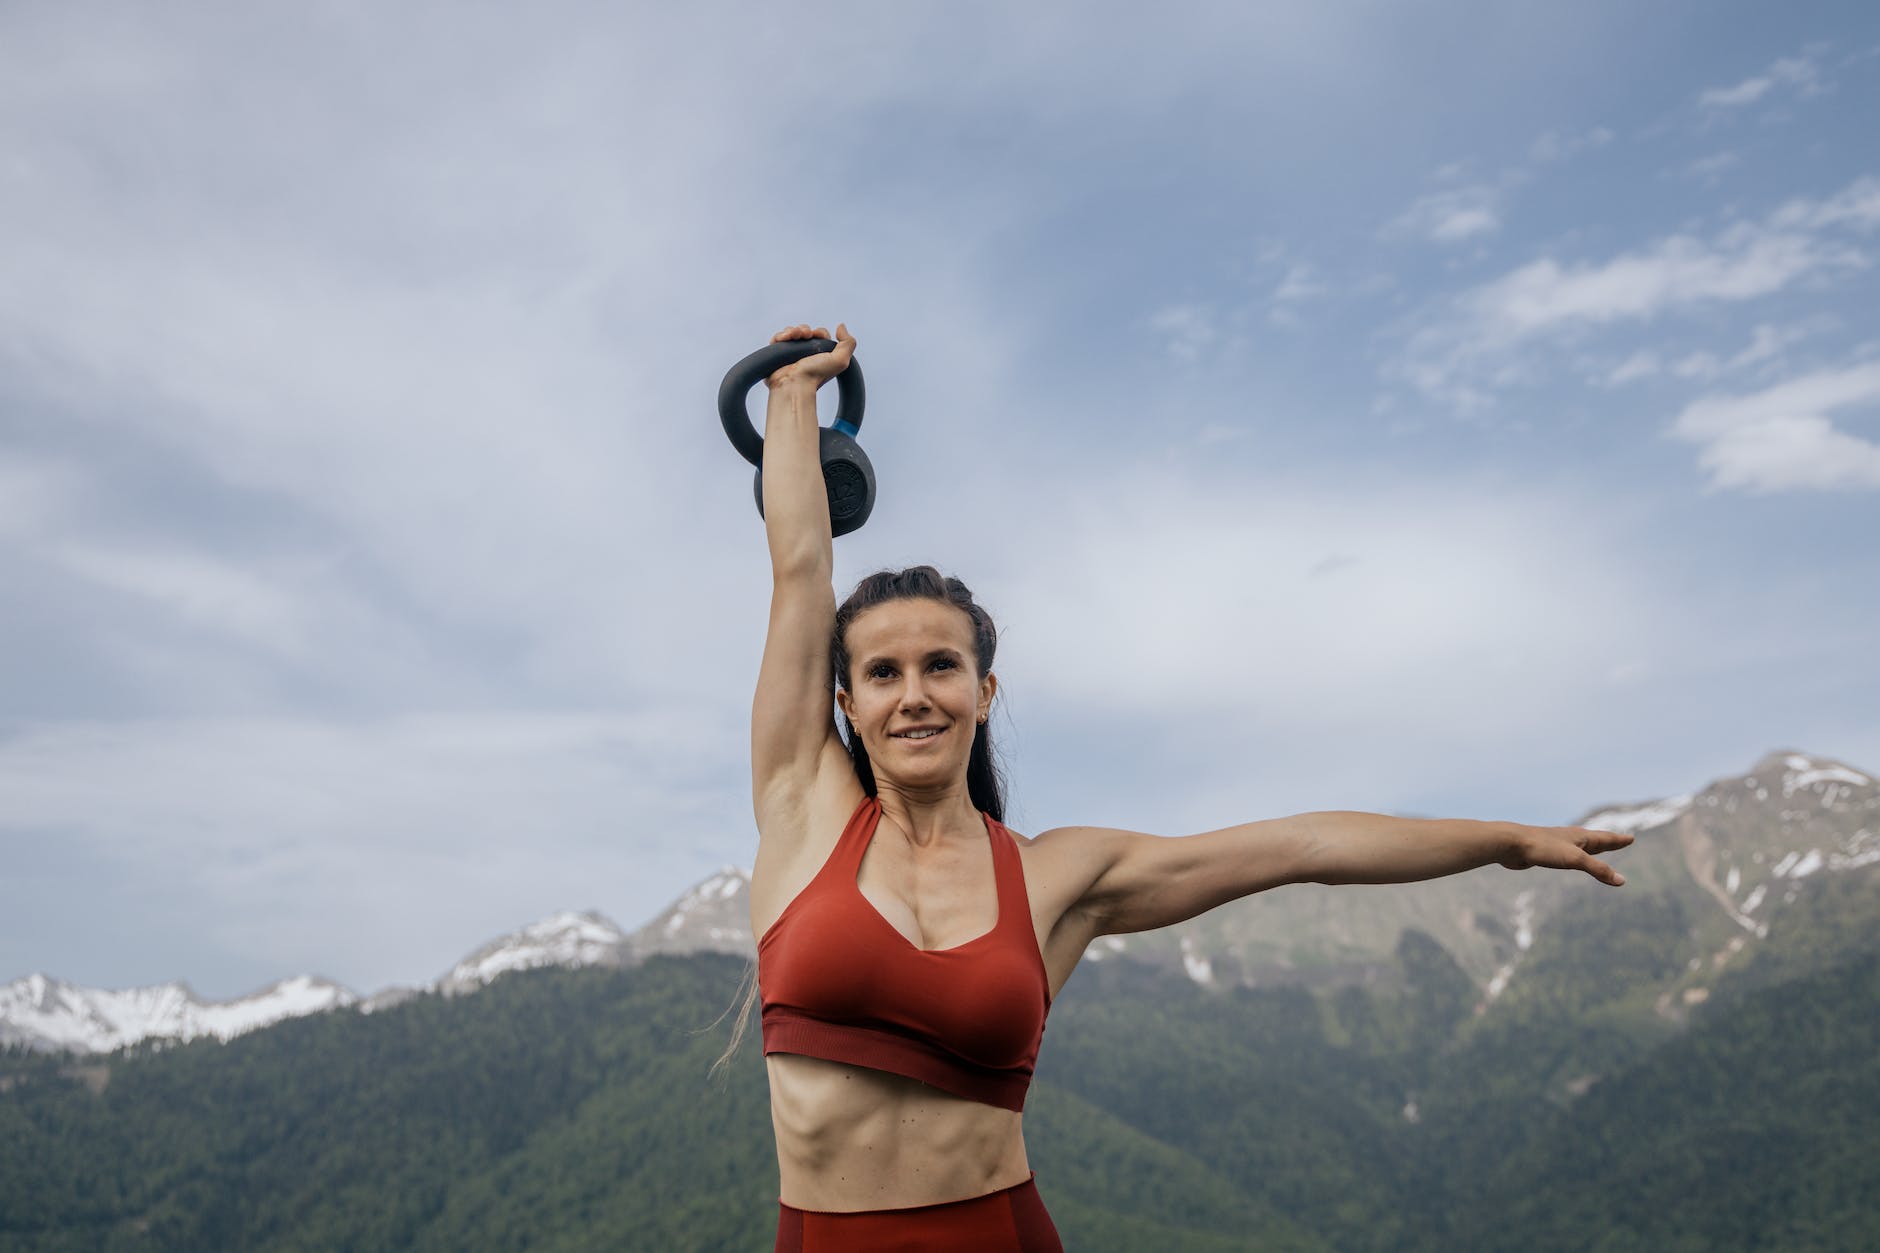 photo of a woman lifting a kettlebell